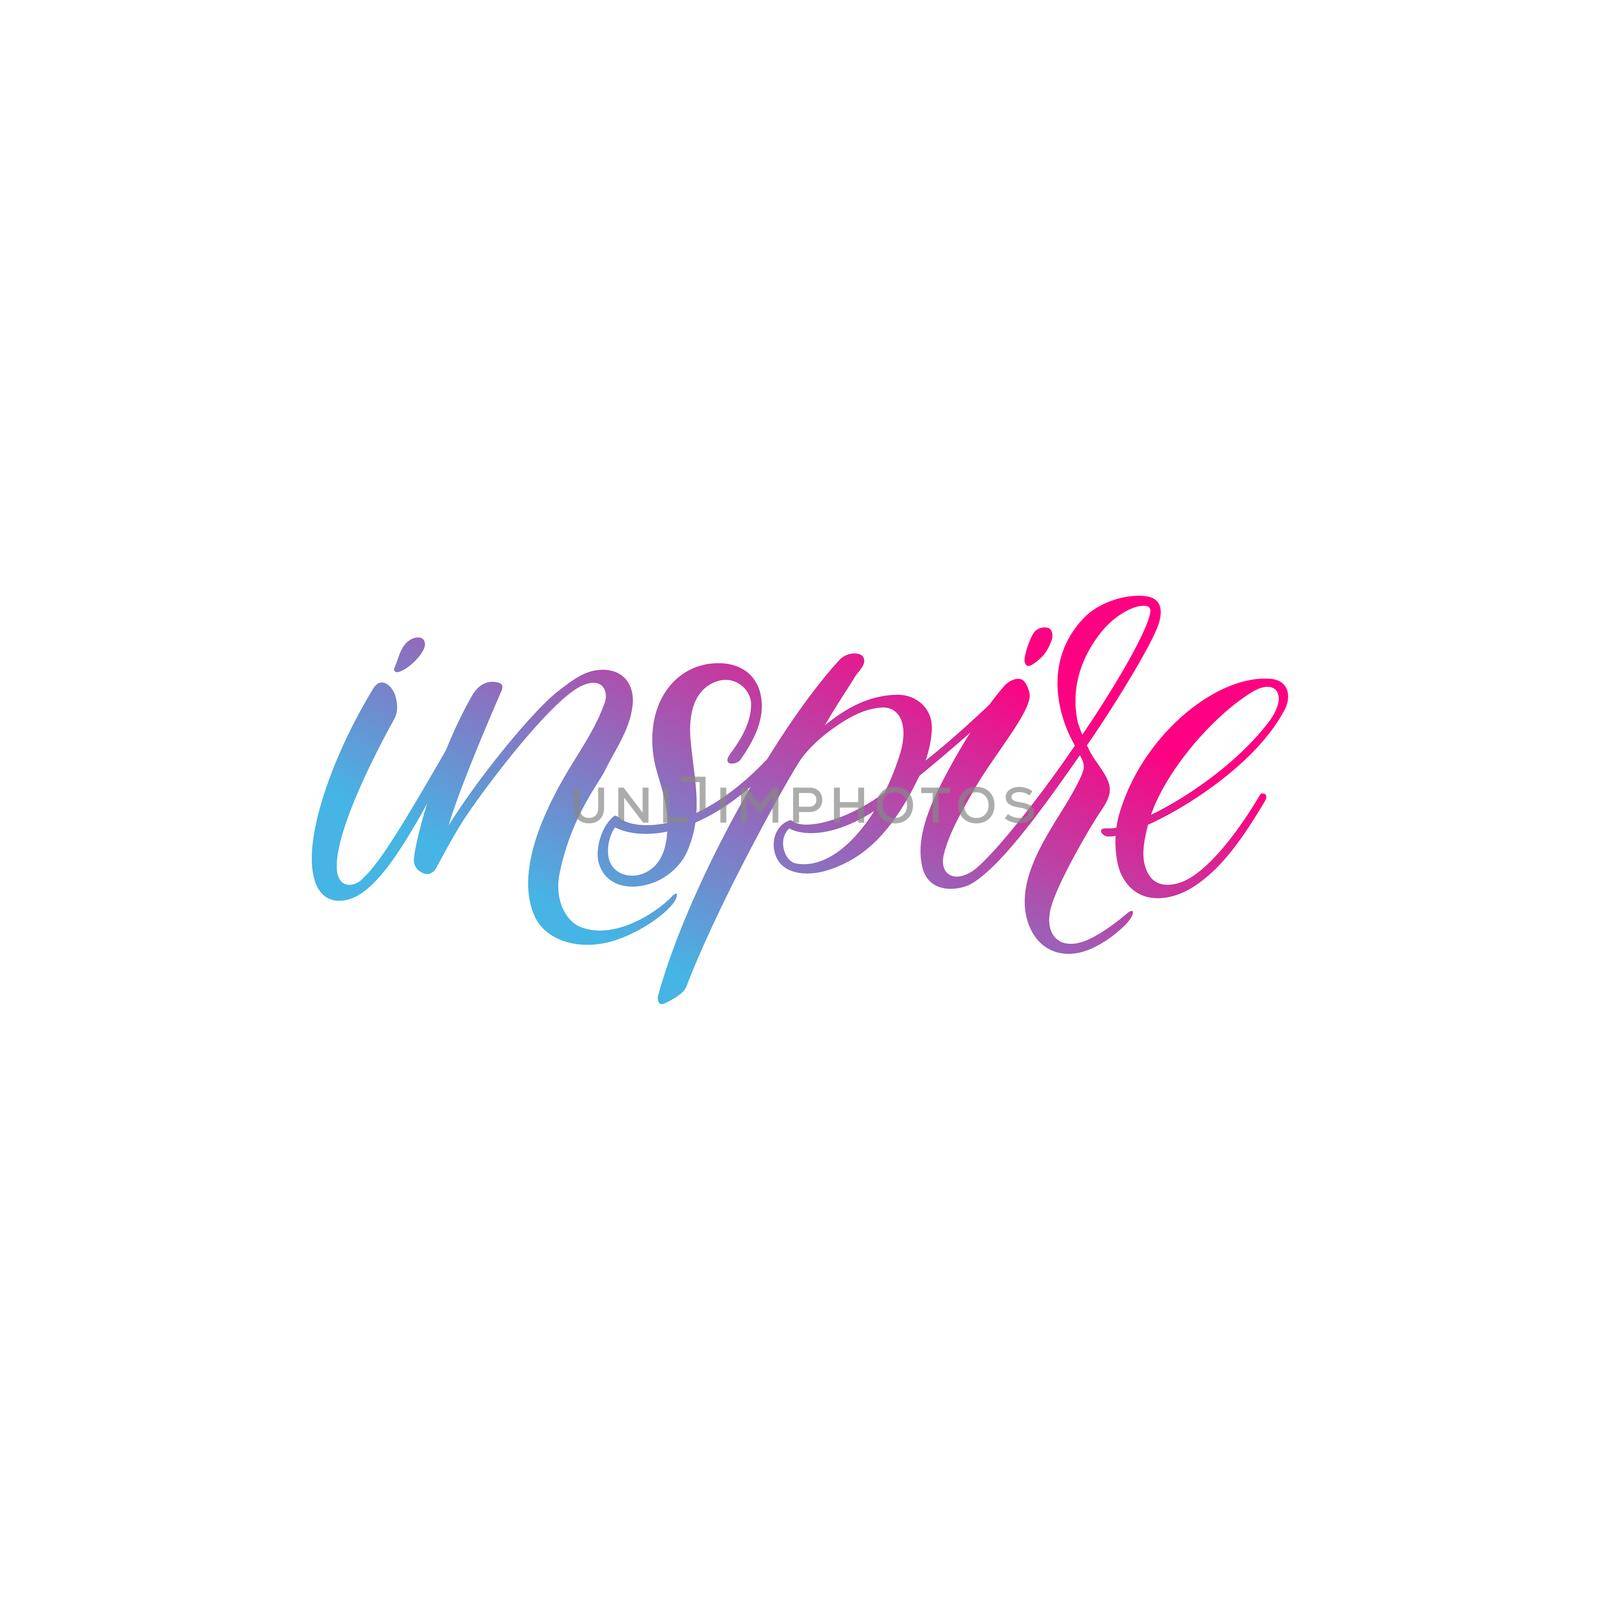 Inspire hand lettering text by melazerg